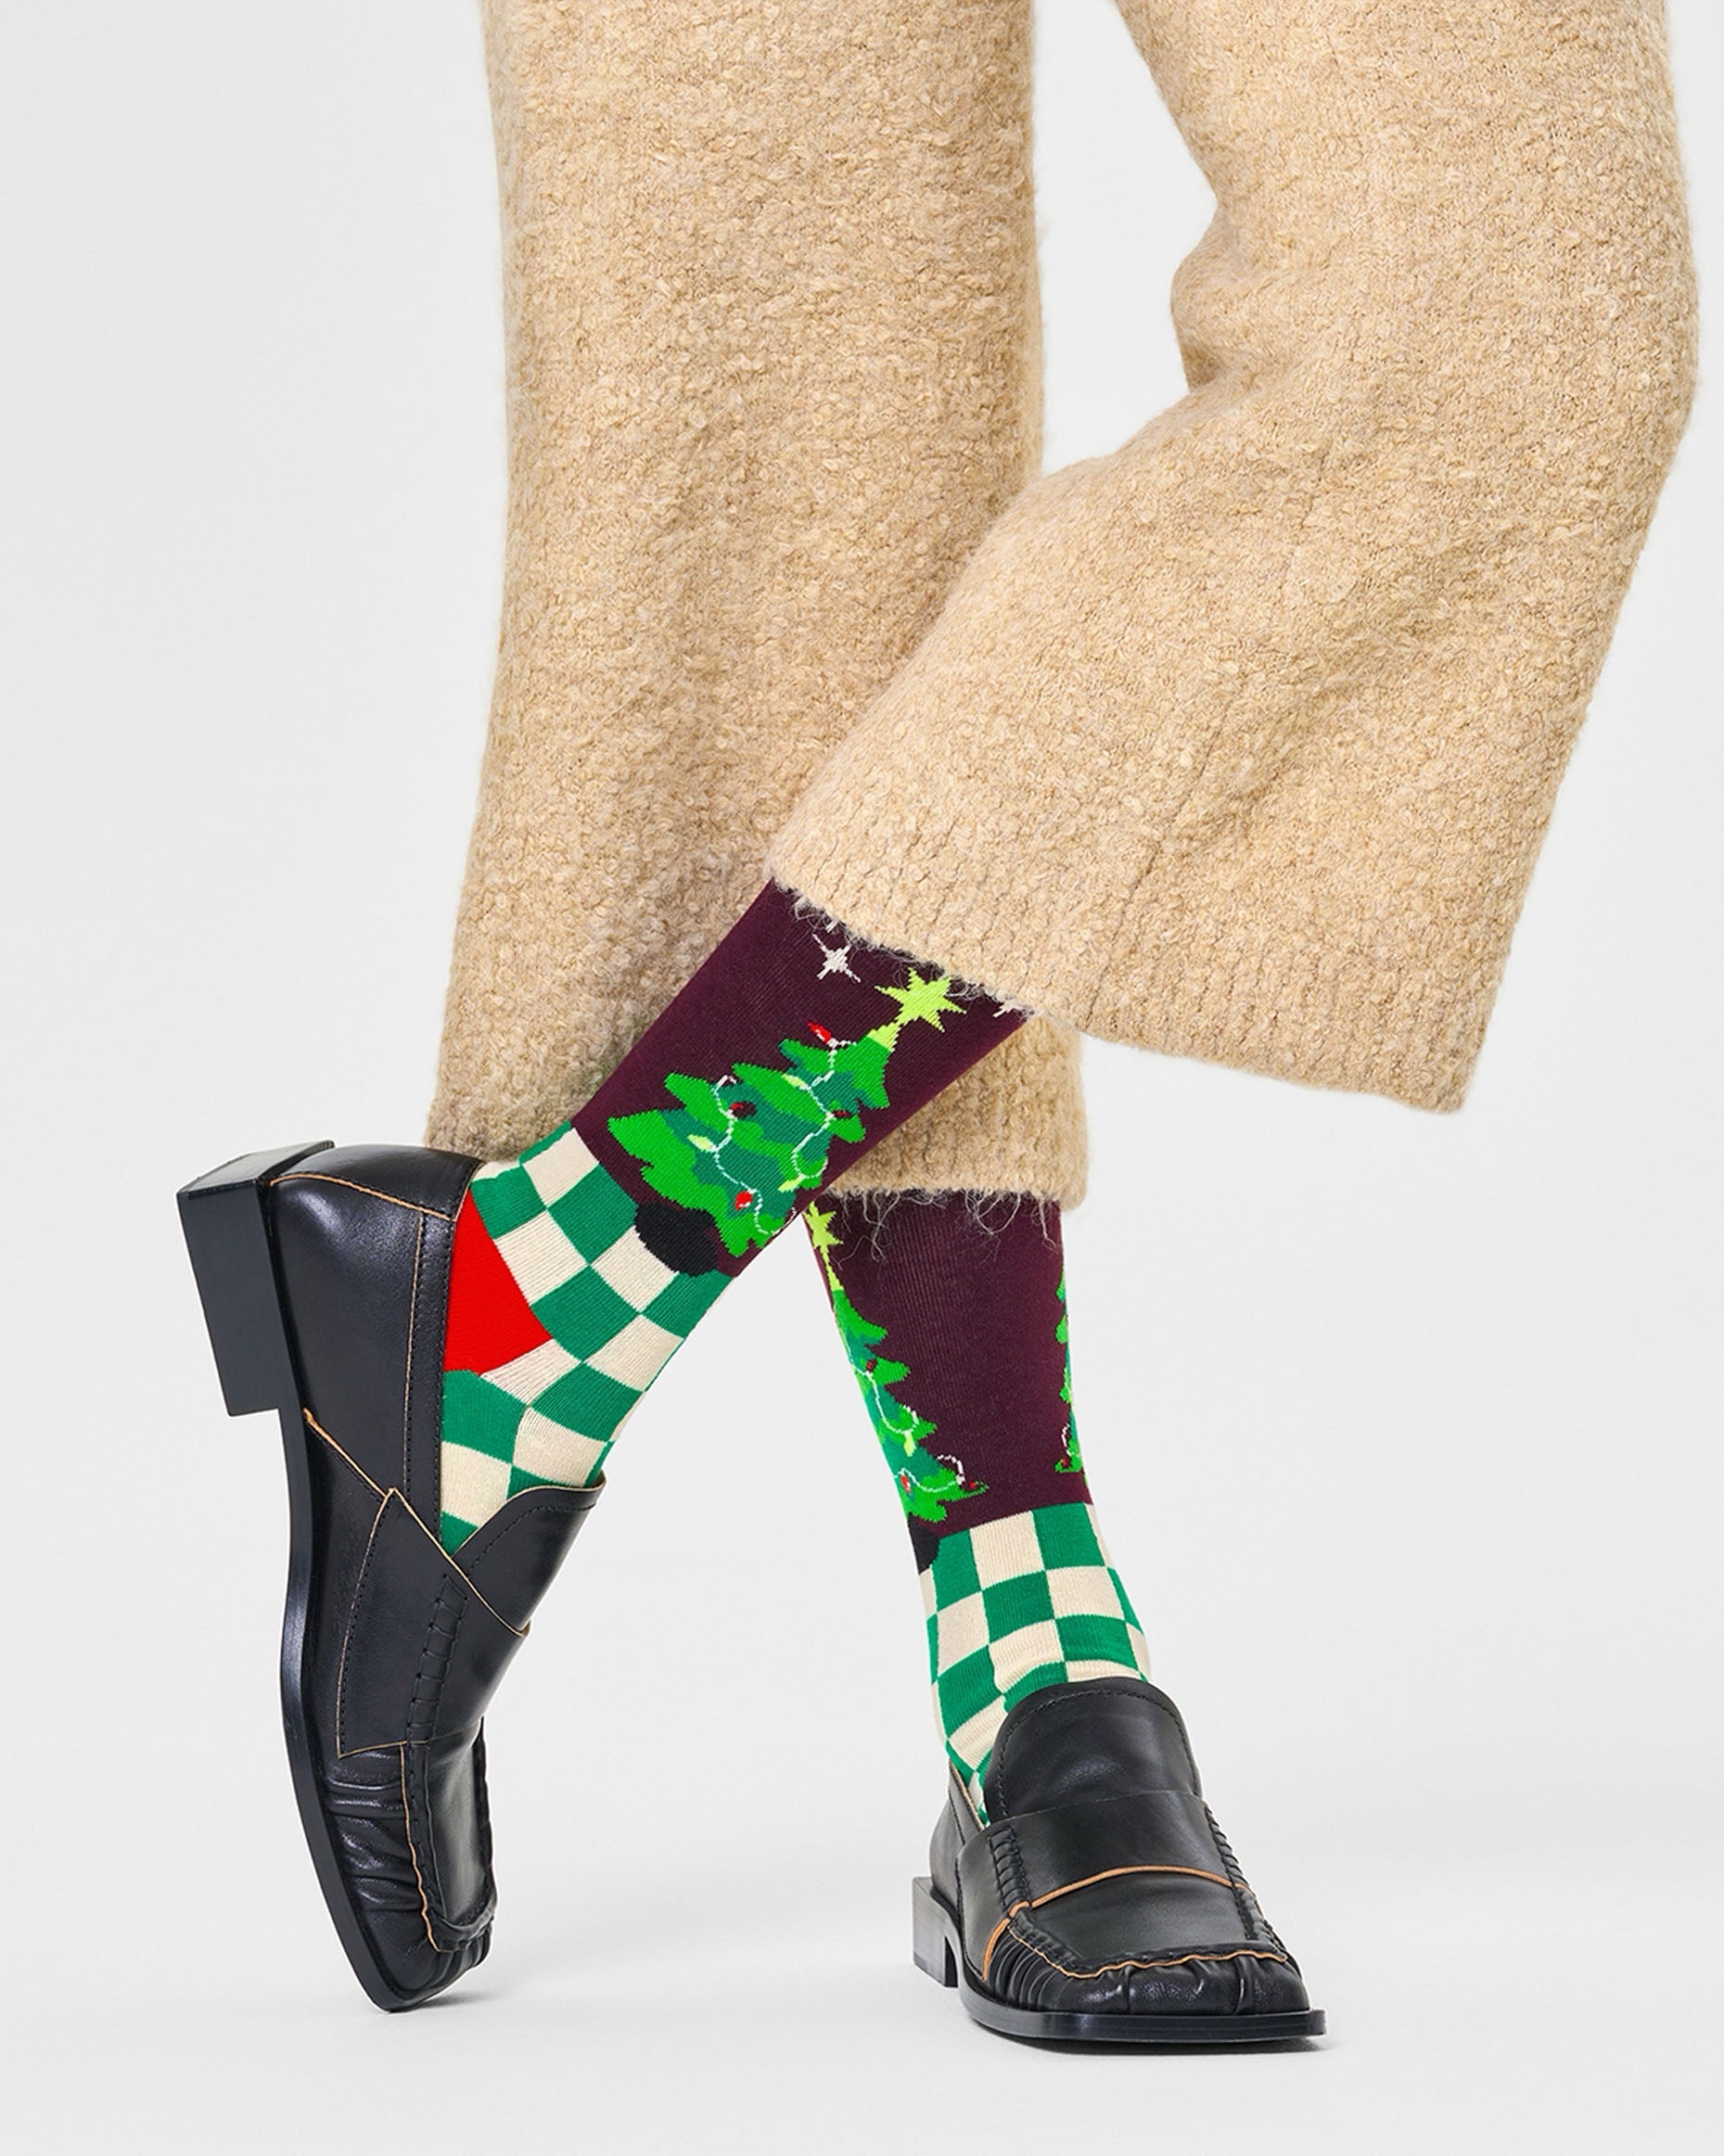 Happy Socks P000262 Christmas Tree Socks - Checkered green and cream socks with a Xmas tree motif on the top (inside and outside) with a burgundy background, red heel. Worn by a woman wearing beige knitted cropped pants and black loafers.